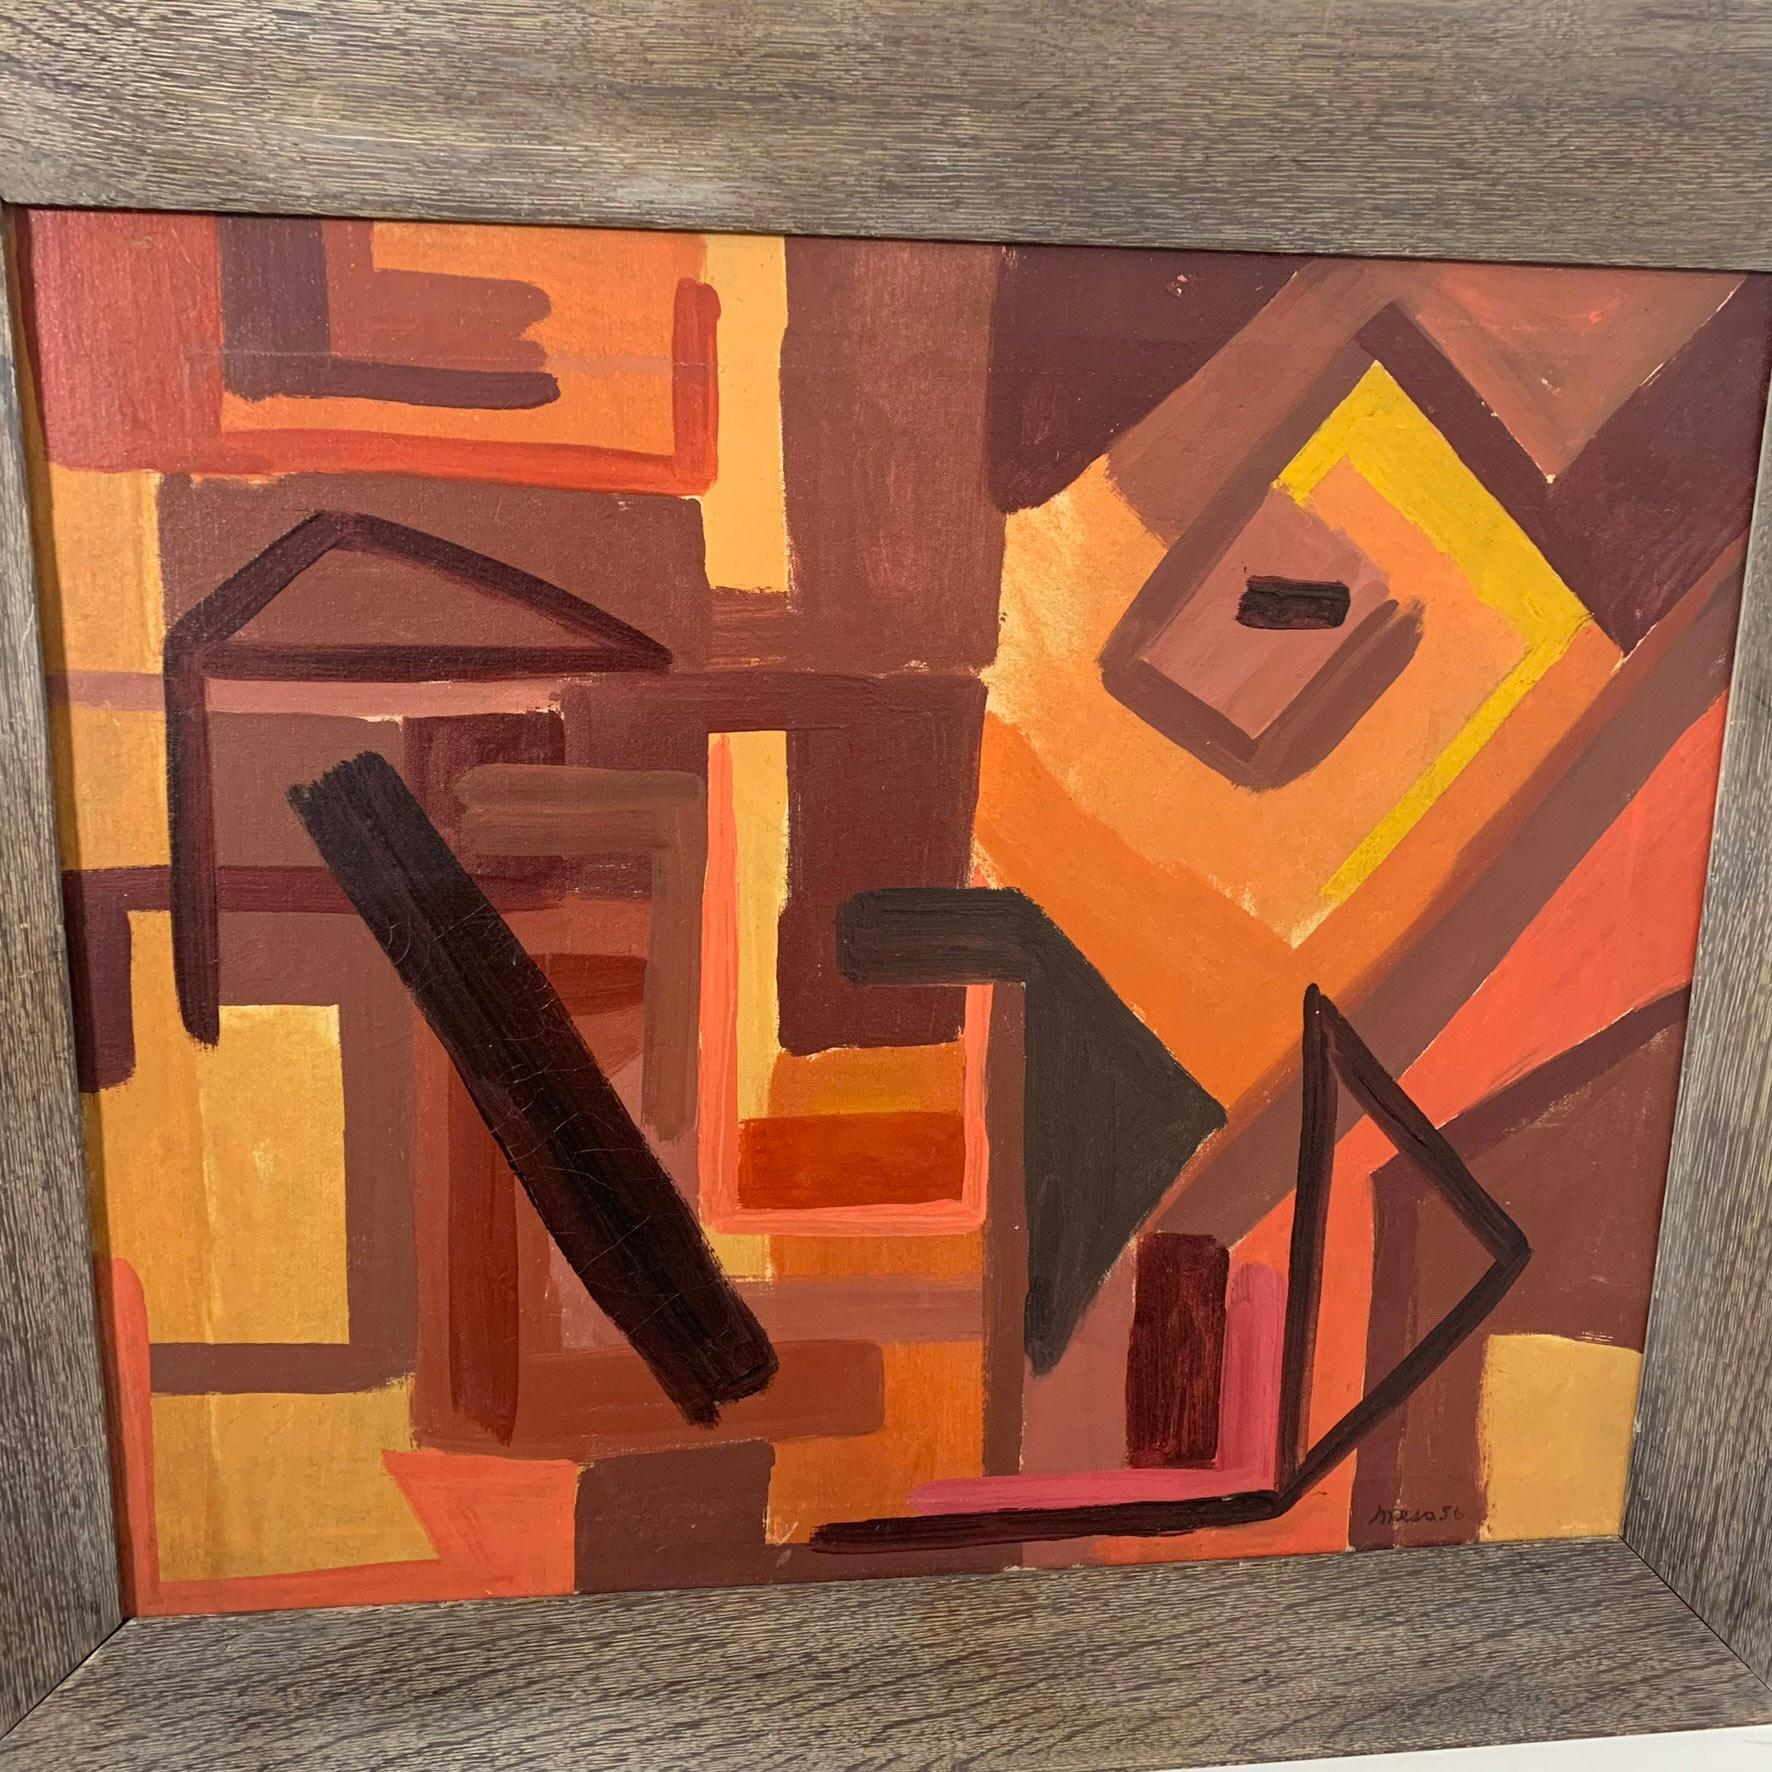 An abstract oil on canvas in cerused oak frame by the noted Philadelphia artist Harold Mesibov, dated 1956.

Biography via Askart, supplied by The Boston Art Club:
